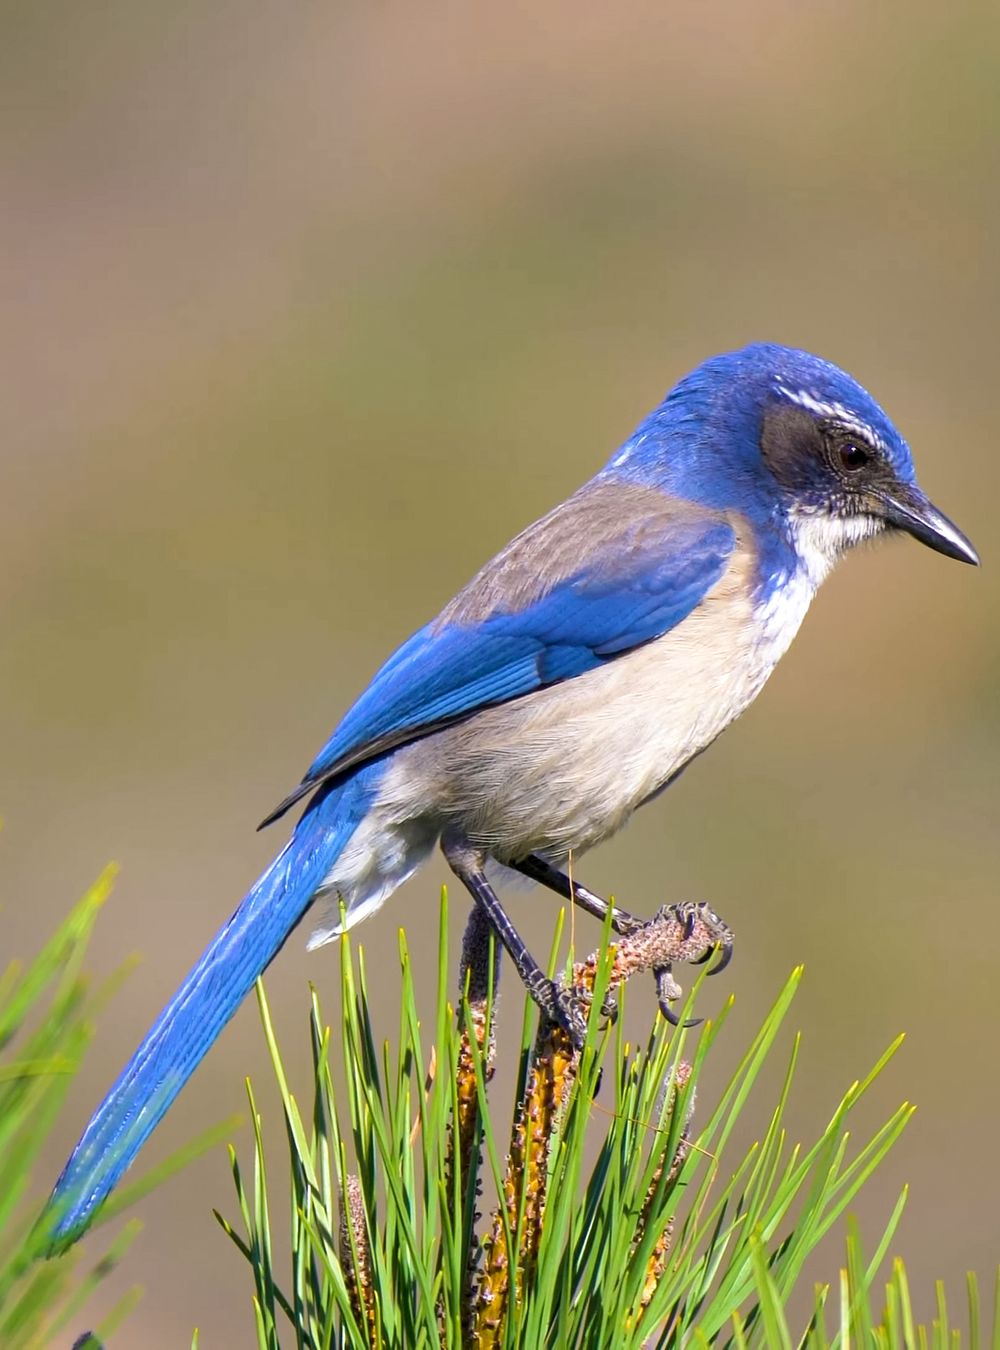 Western Scrub-Jay One of the Smartest Birds in the World